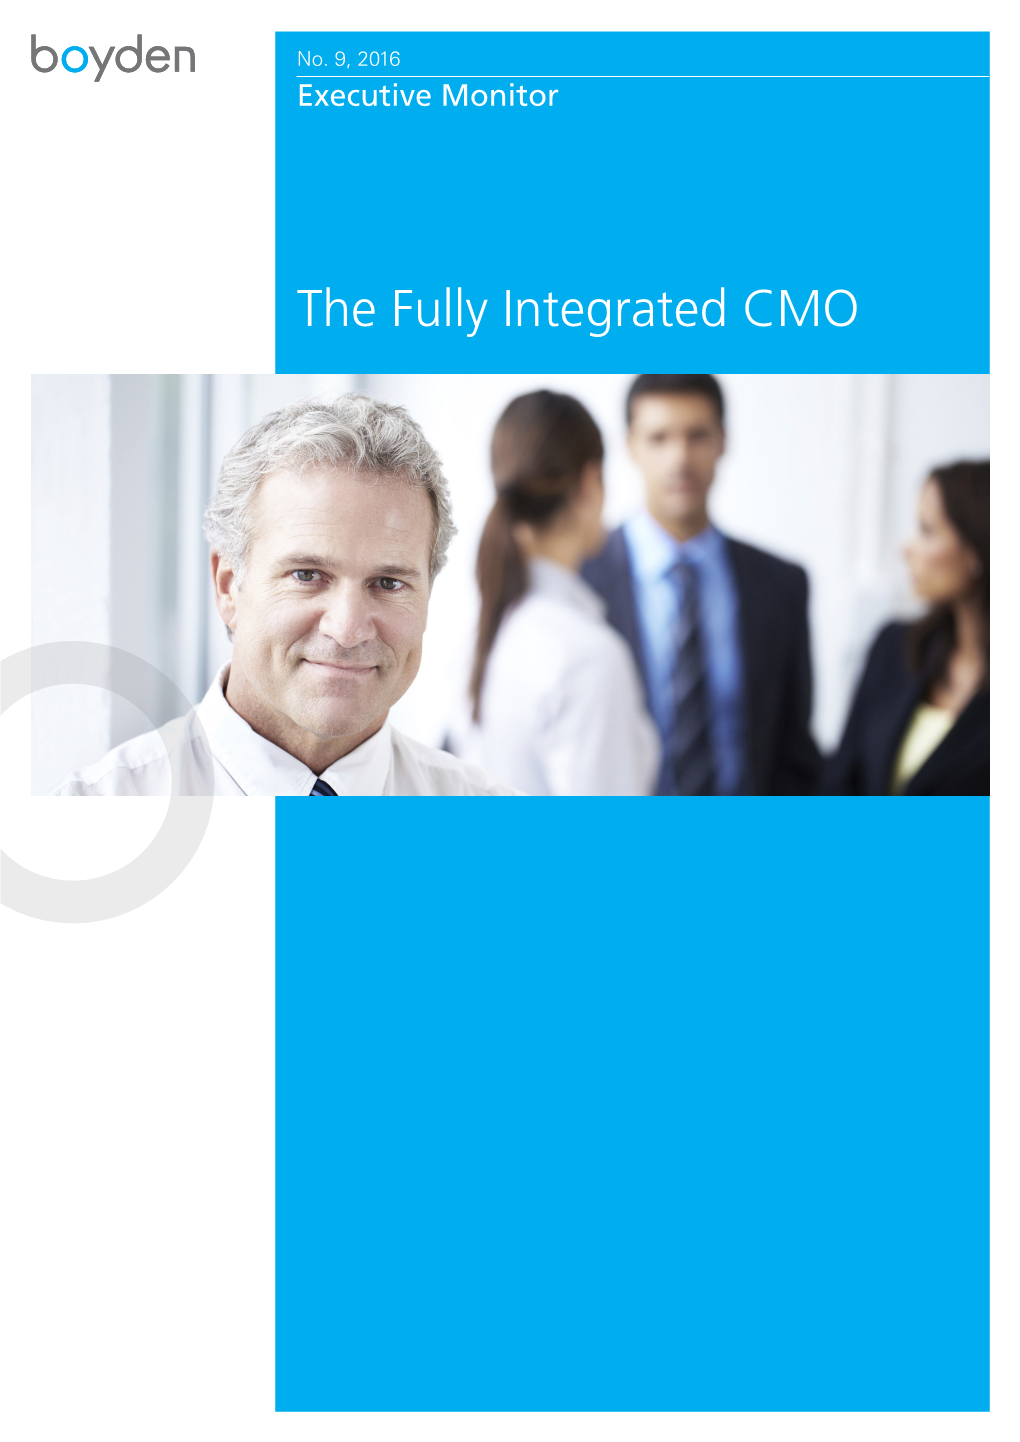 The Fully Integrated CMO Executive Monitor the Fully Integrated CMO